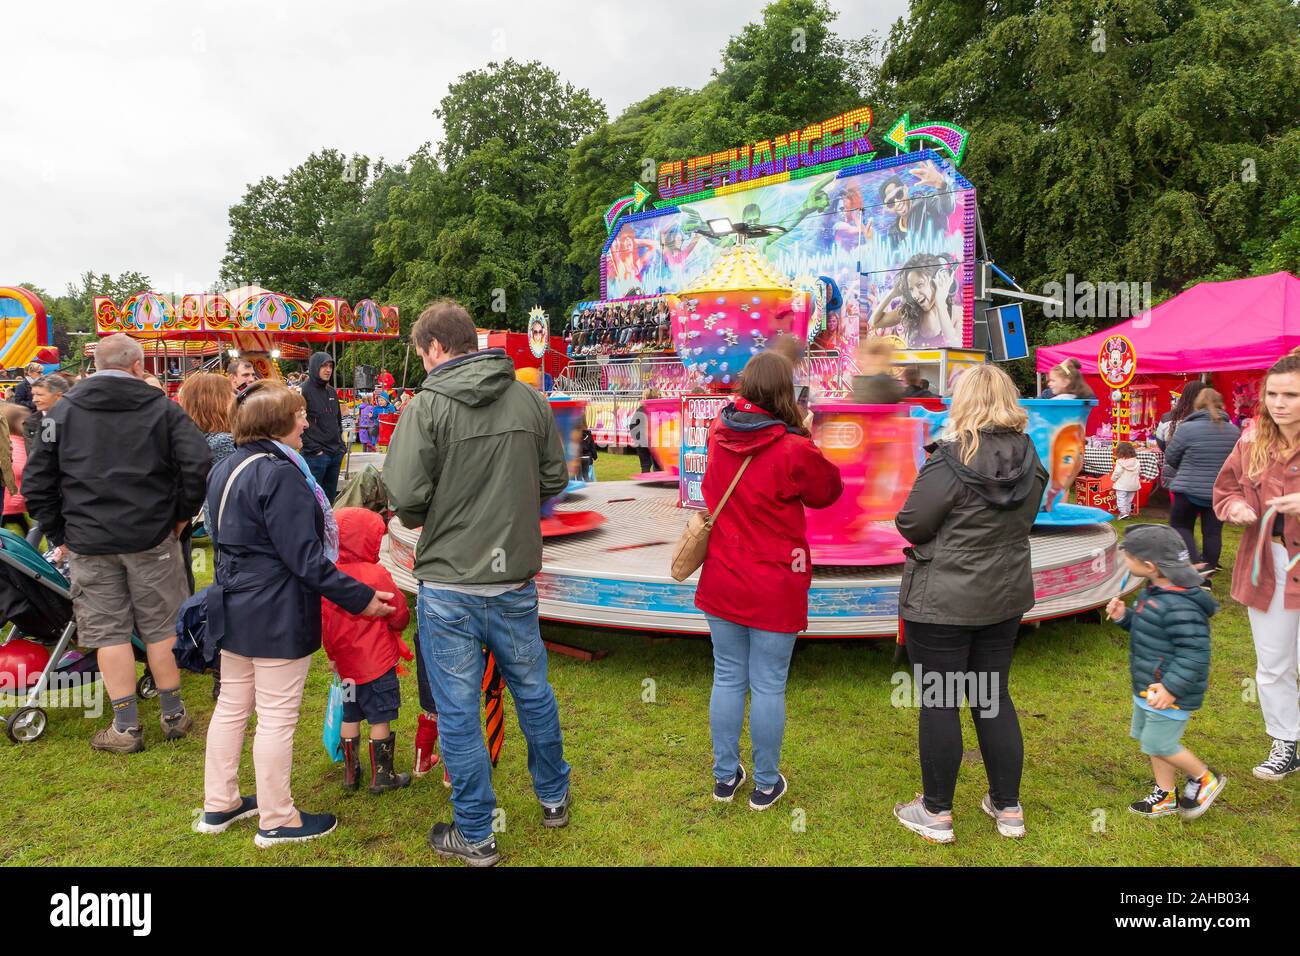 People watching the Cliffhanger fairground ride and a children's tea cups ride in wet weather in summer after the Thelwall Rose Queen procession 2019 Stock Photo